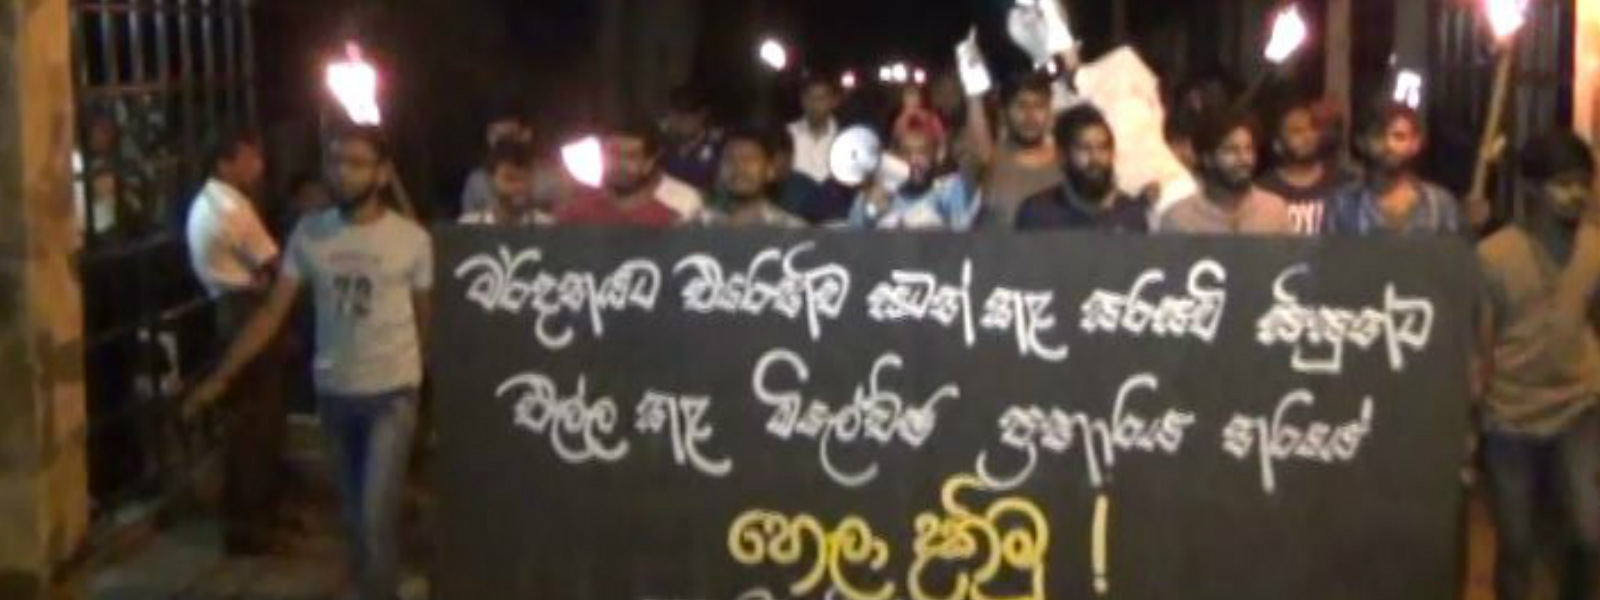 Students protest against tear gas & water cannons